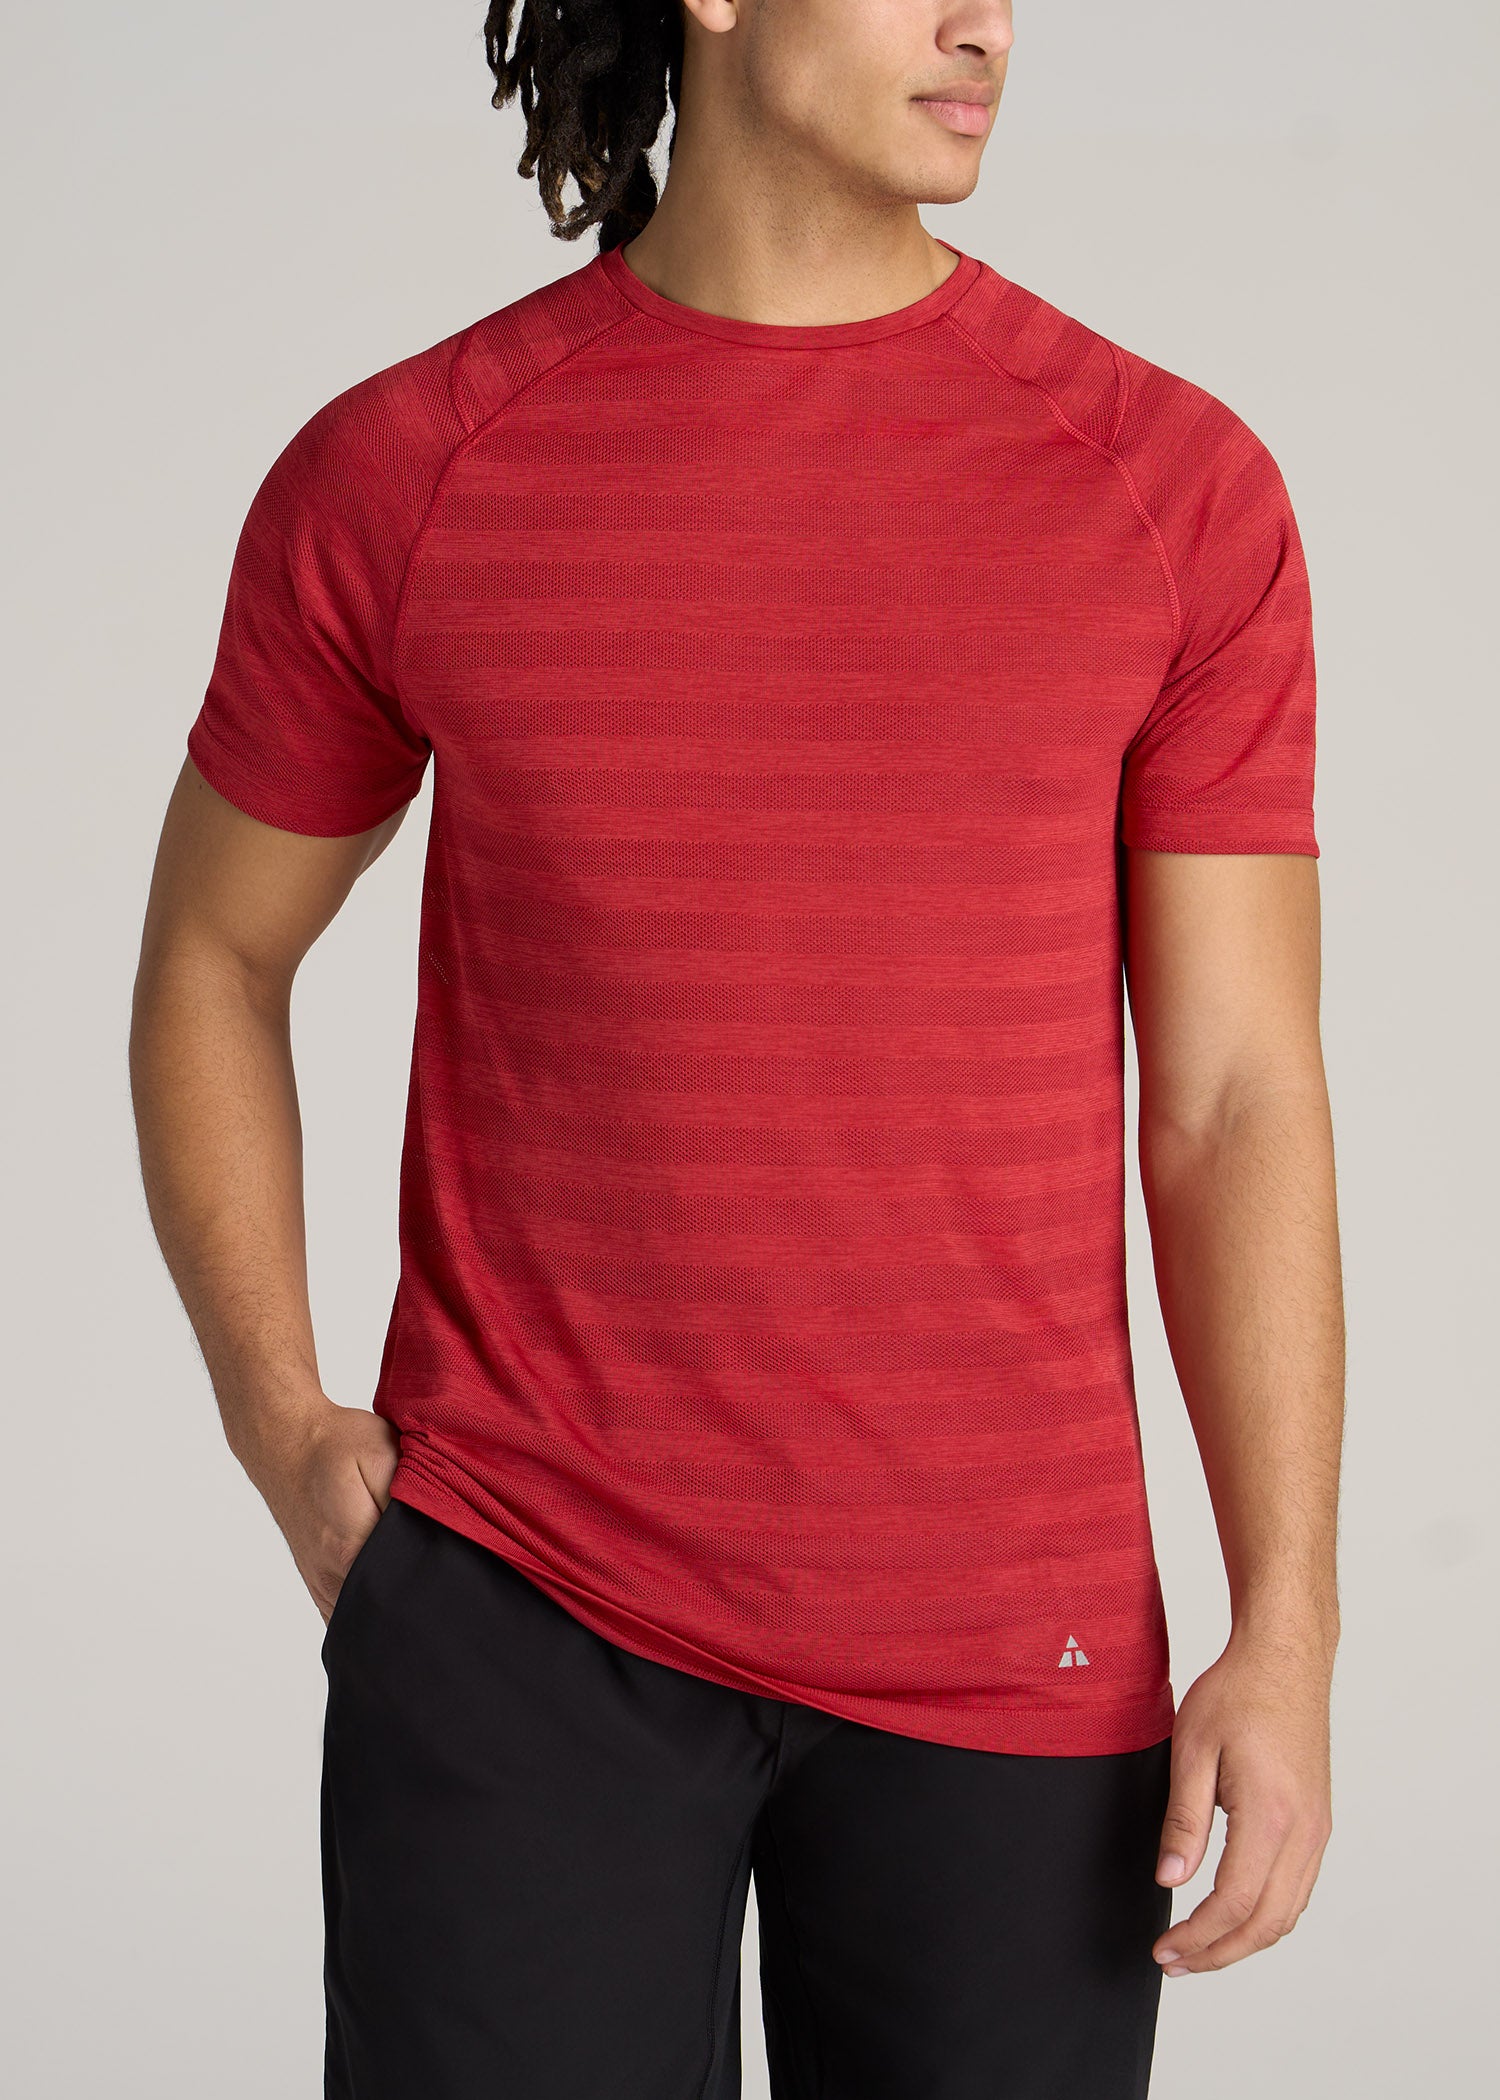 A.T. Performance Modern-Fit Crewneck Raglan Short Sleeve T-Shirt for Tall Men in Red Heather XL / Tall / Red Heather